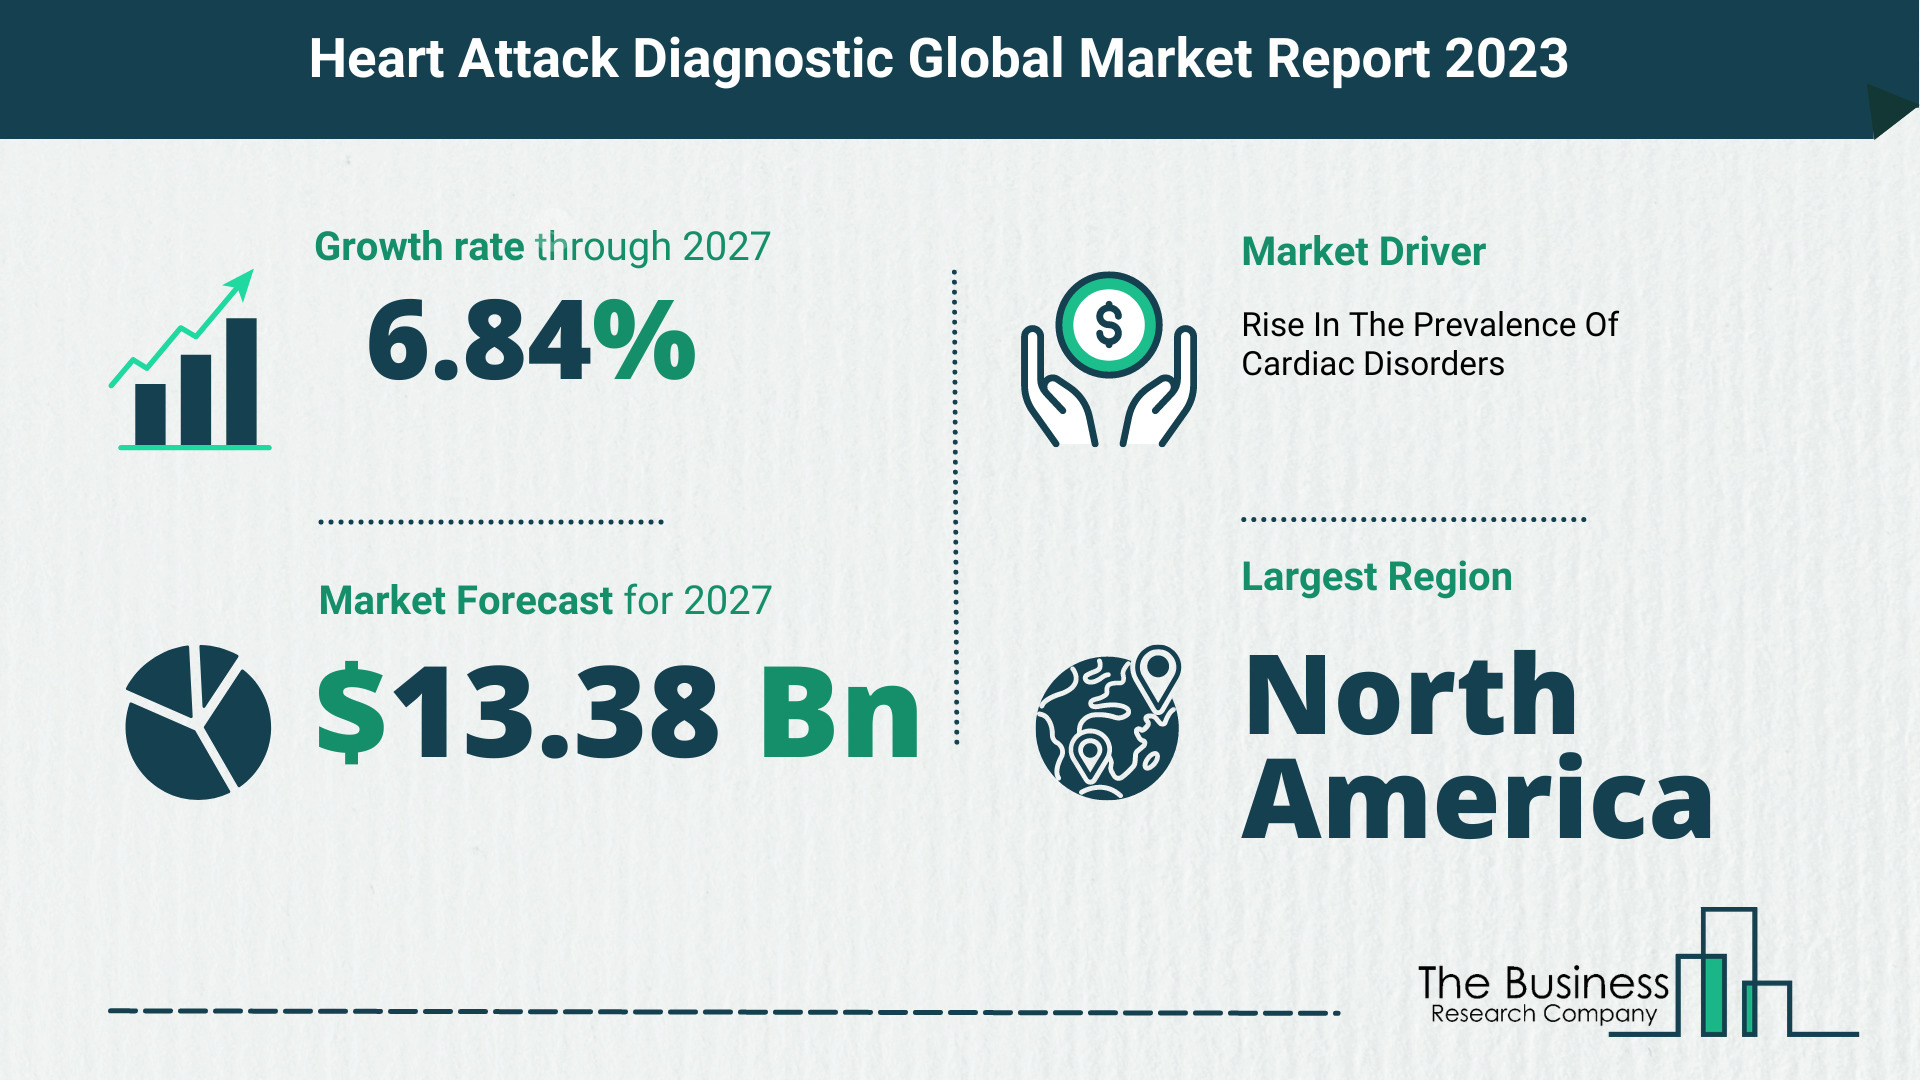 Global Heart Attack Diagnostic Market Opportunities And Strategies 2023